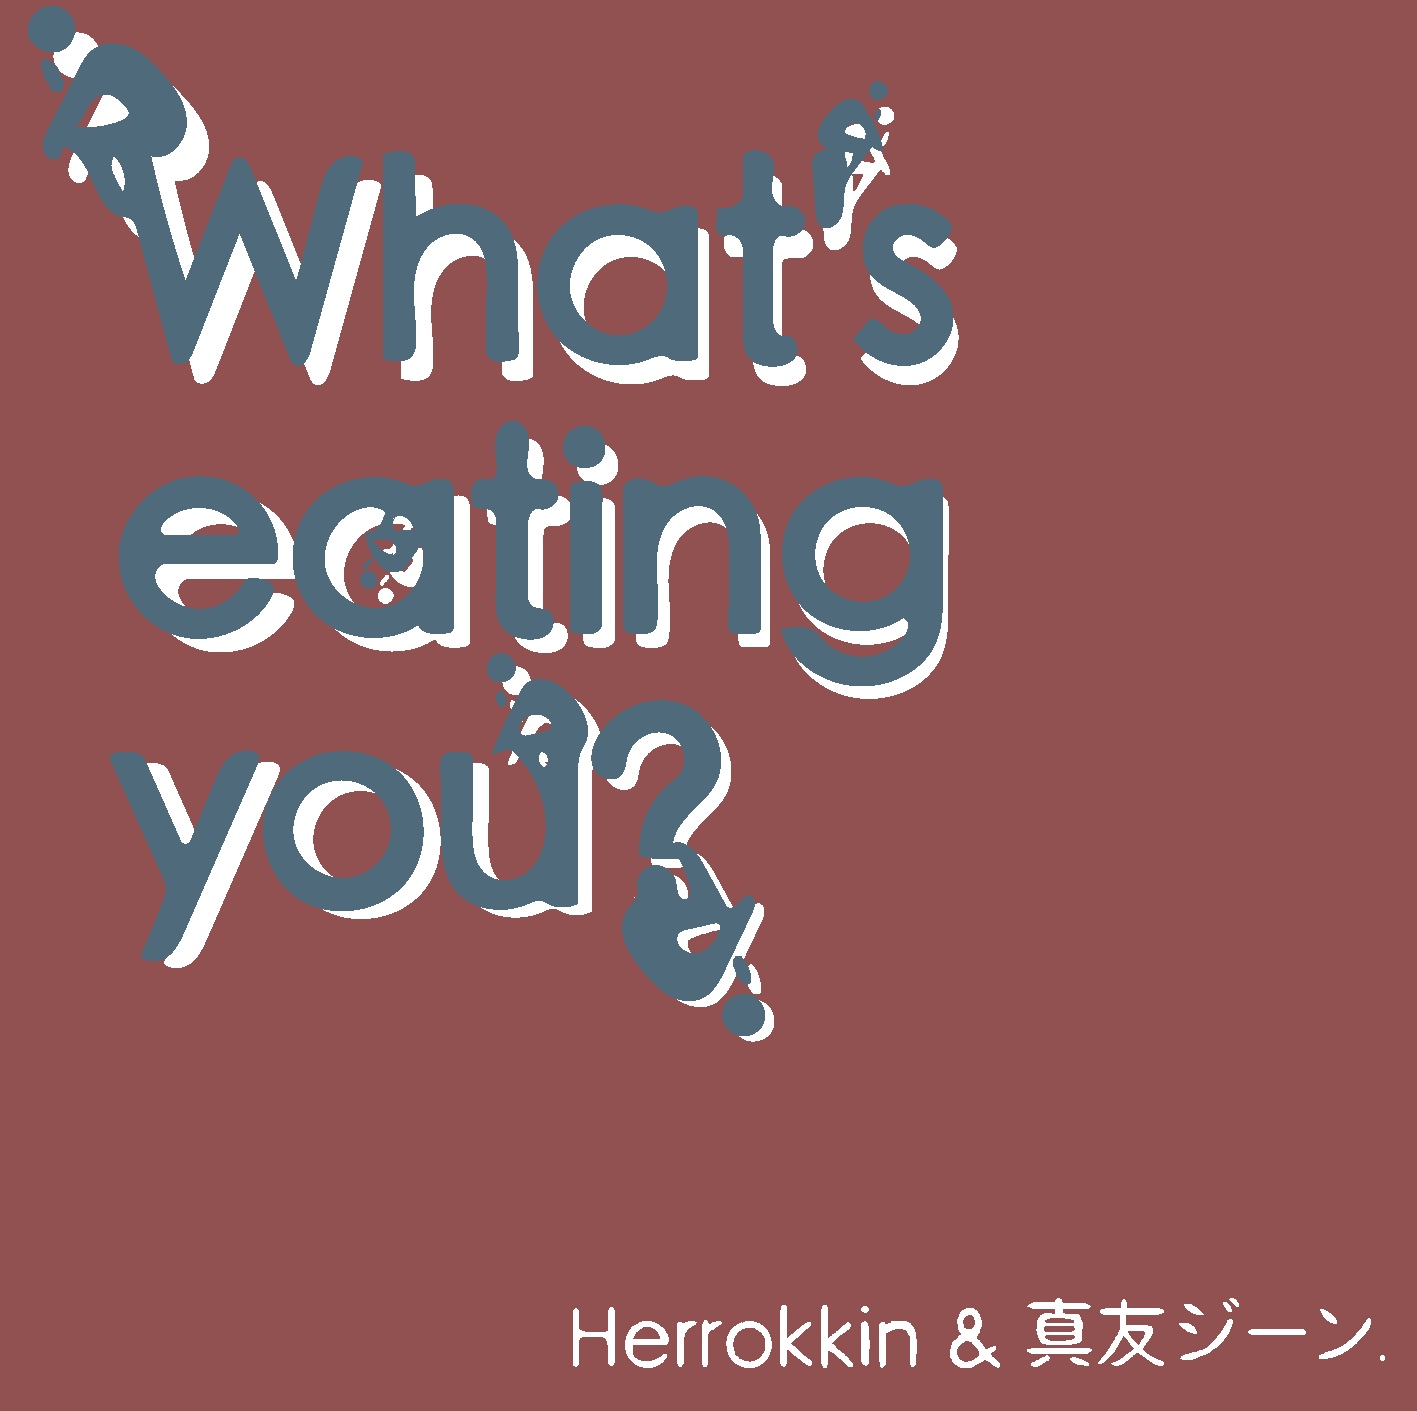 20150617_what_s_eating_you